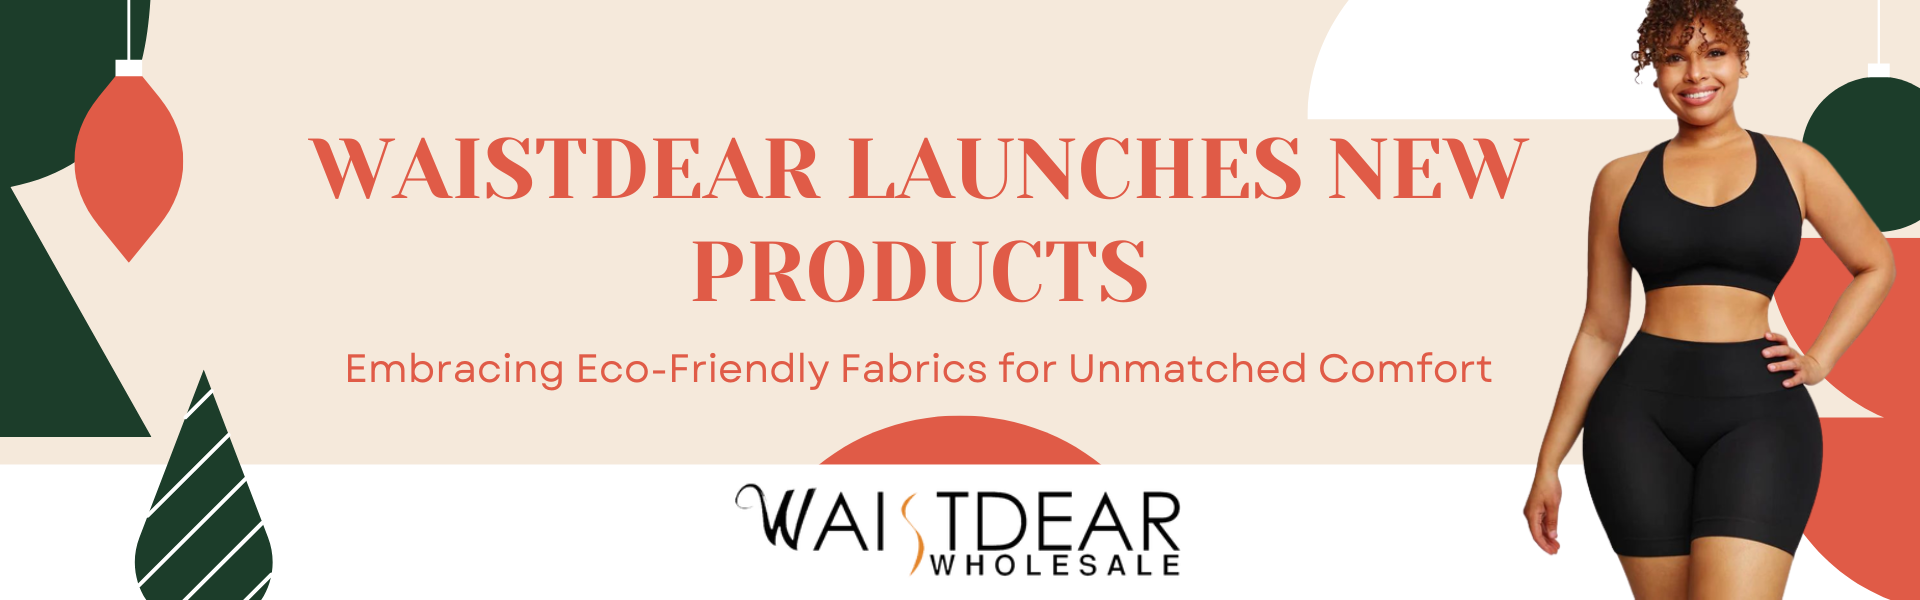 Waistdear Launches New Products: Embracing Eco-Friendly Fabrics for Unmatched Comfort